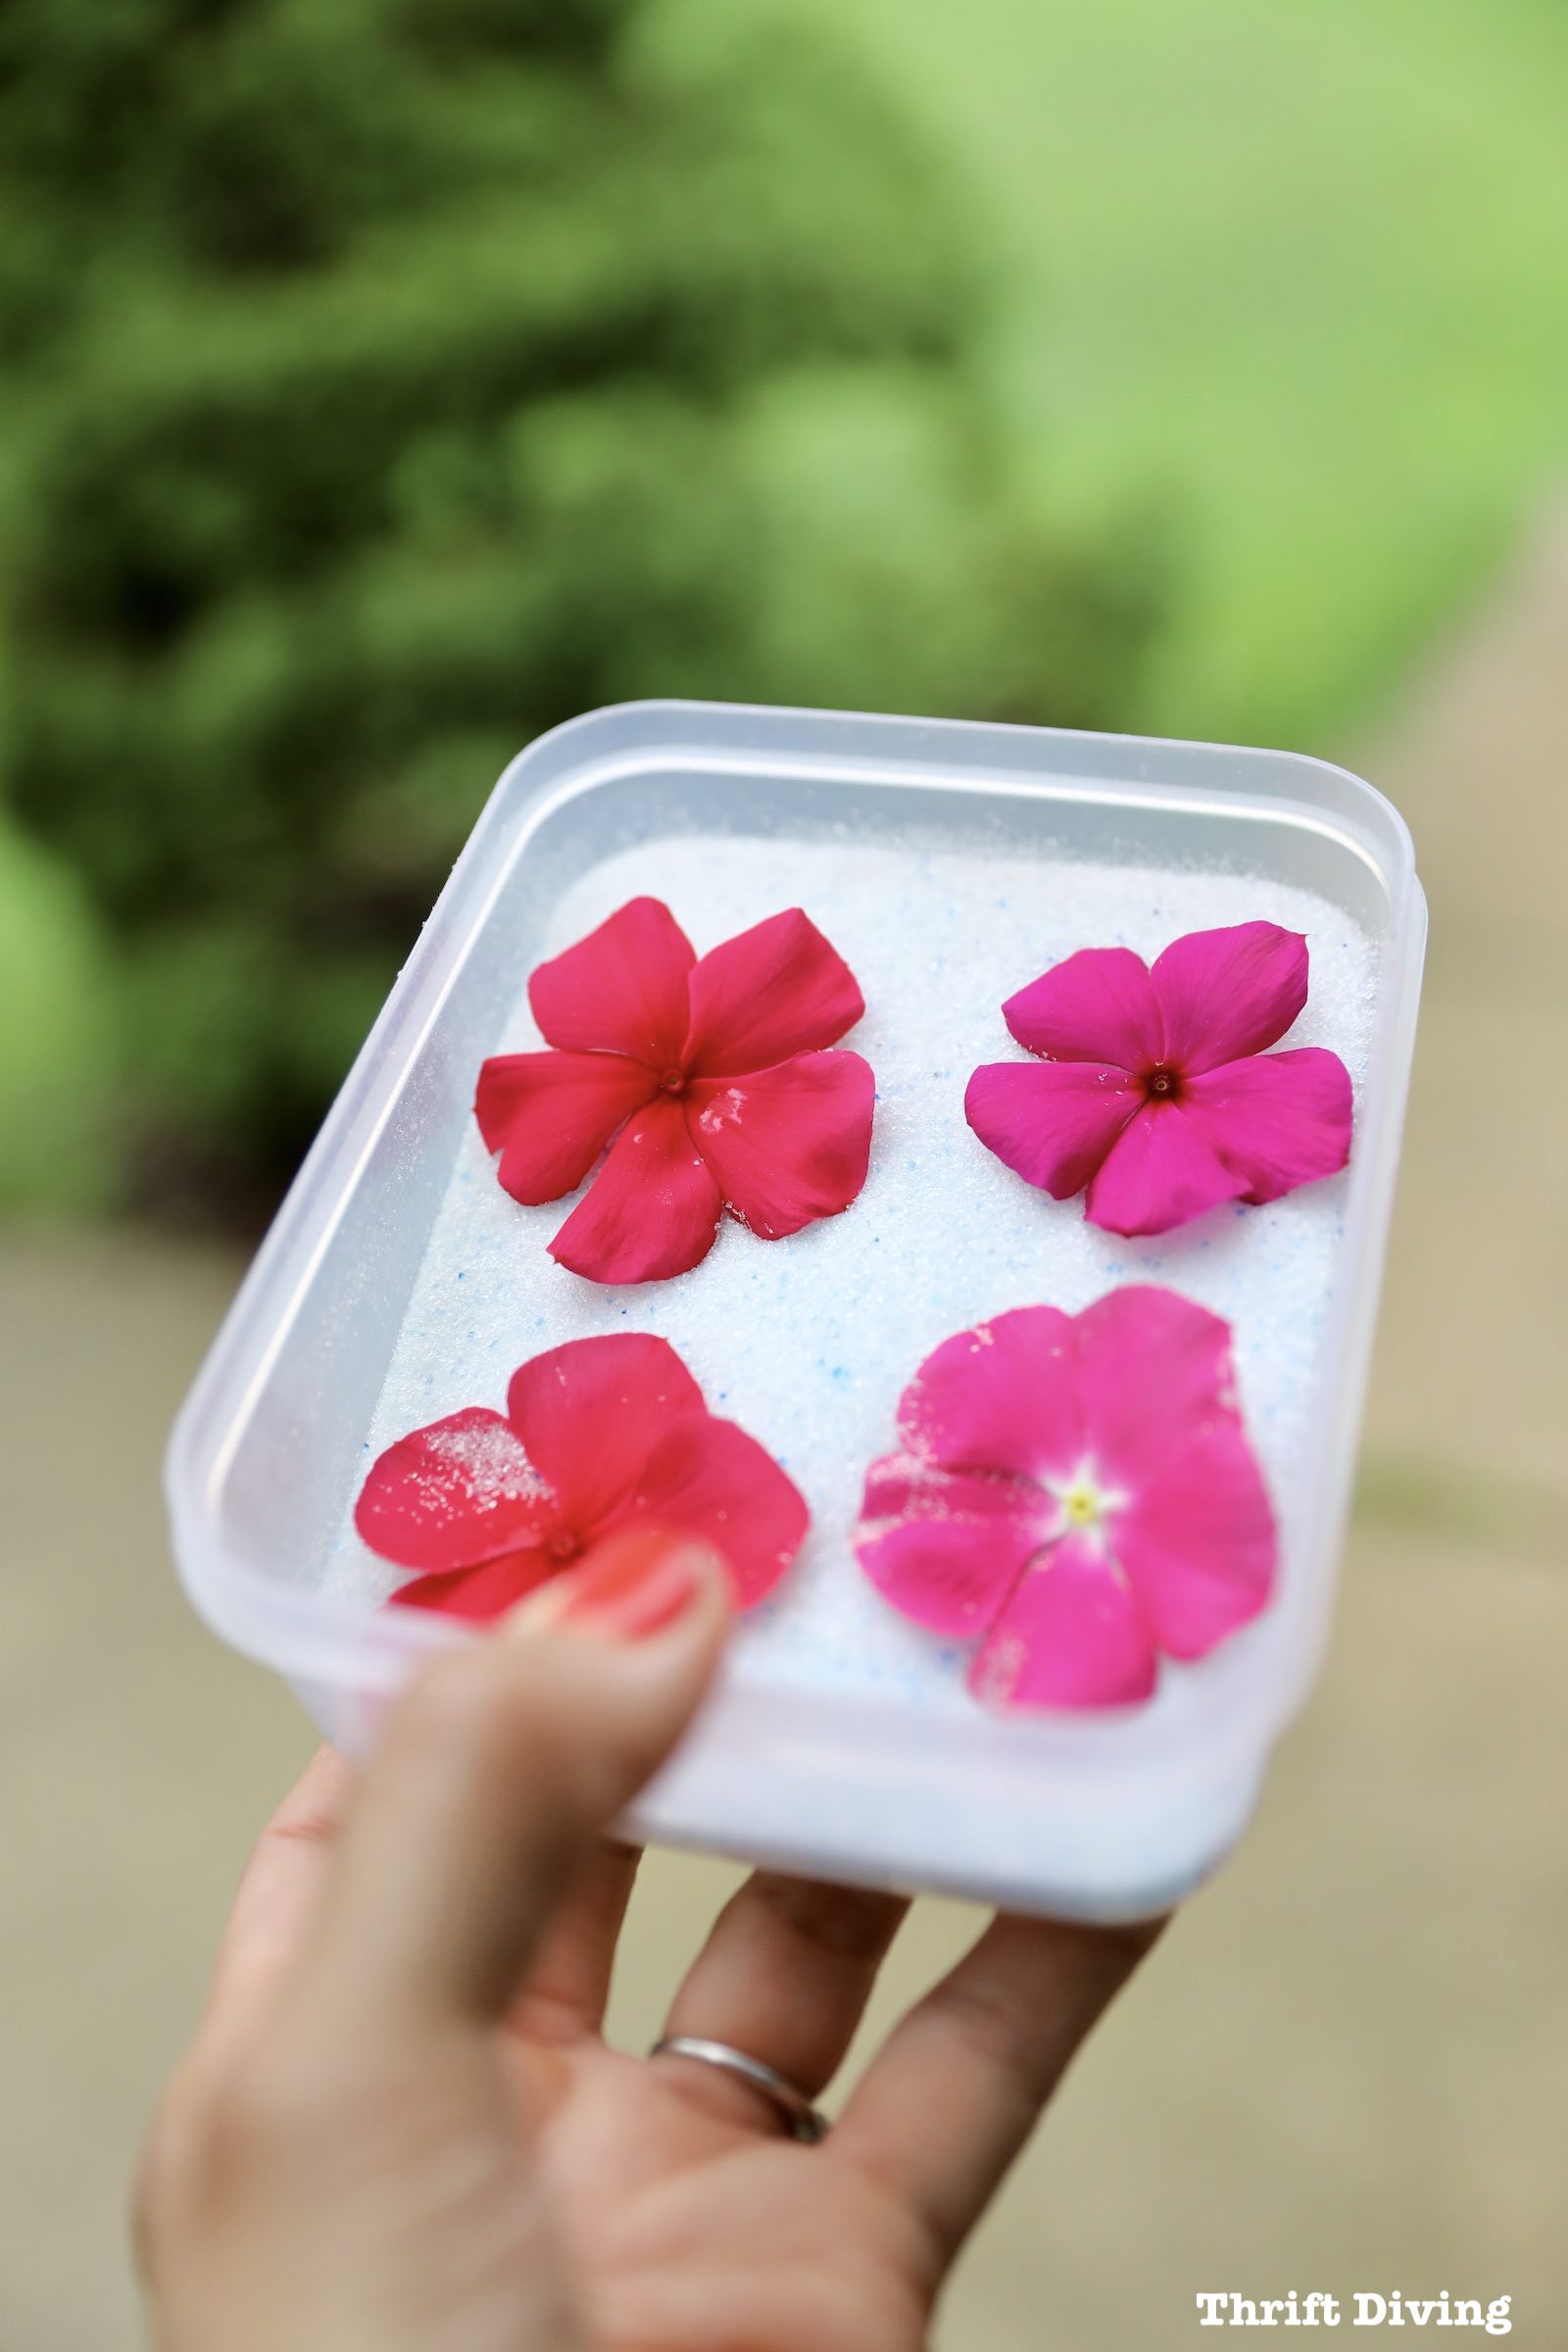 Making epoxy flower art drink coasters - Drying flowers with silica gel - Thrift Diving